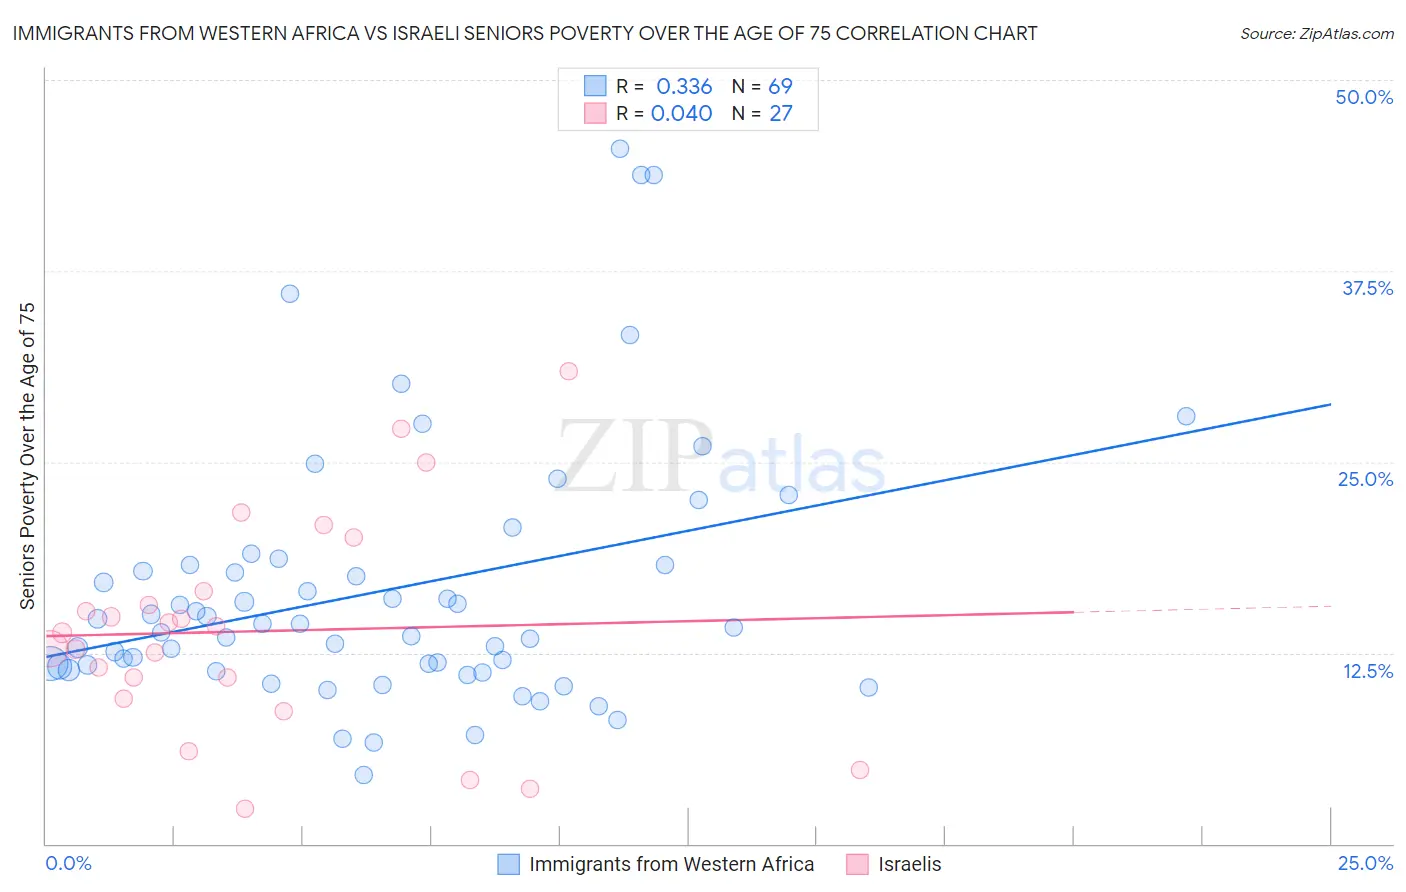 Immigrants from Western Africa vs Israeli Seniors Poverty Over the Age of 75